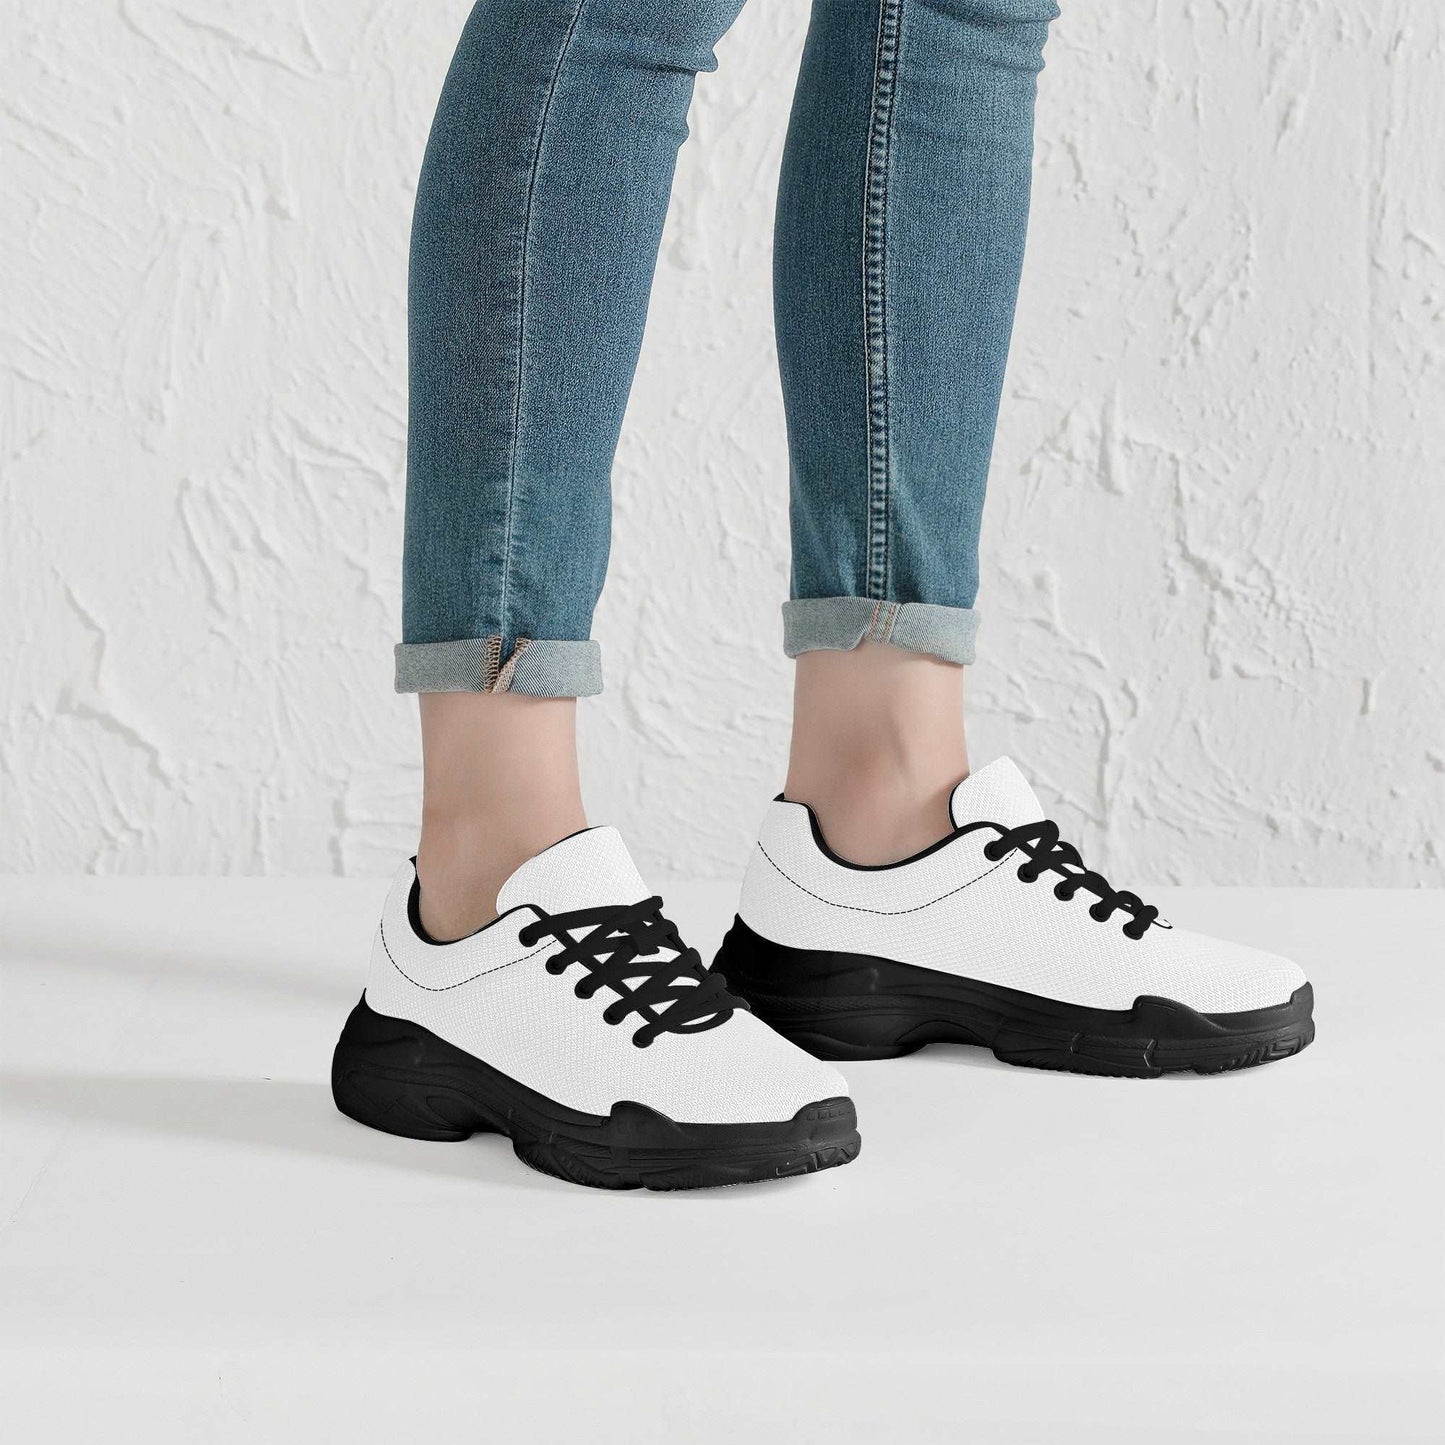 Create Your Own - Chunky Sneakers - Black - HayGoodies